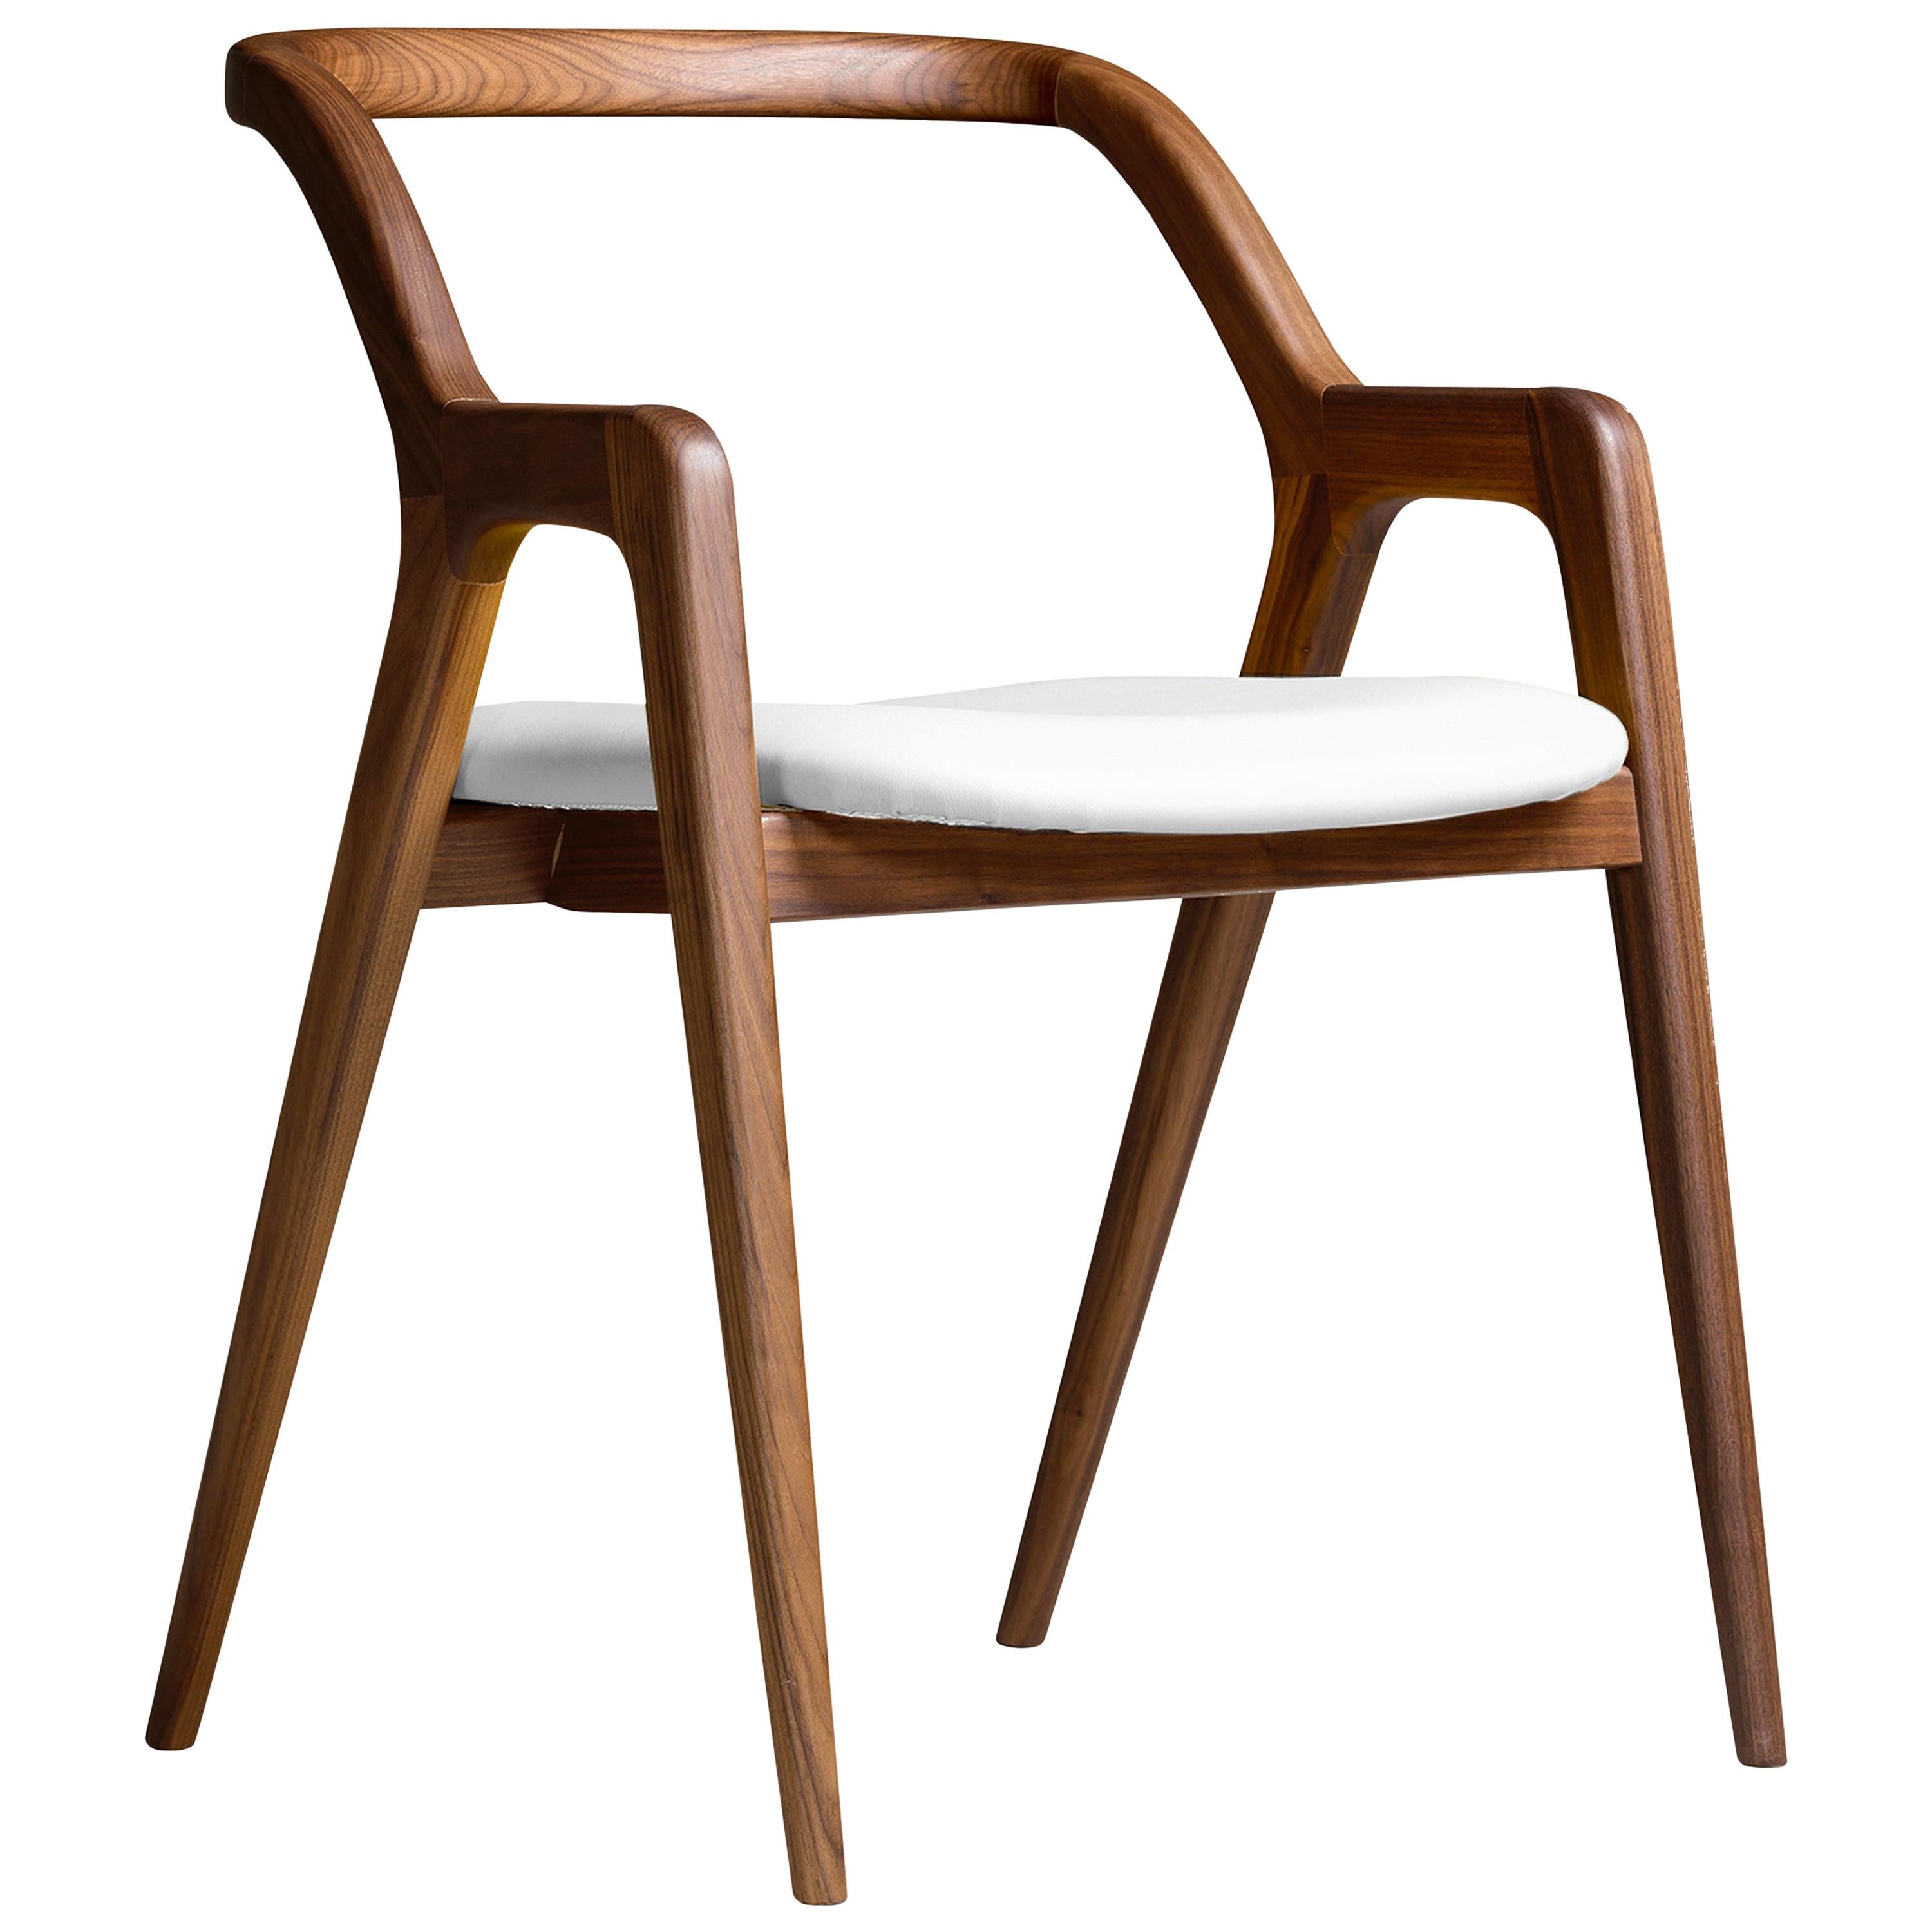 In breve Solid Wood Chair, Walnut in Hand-Made Natural Finish, Contemporary